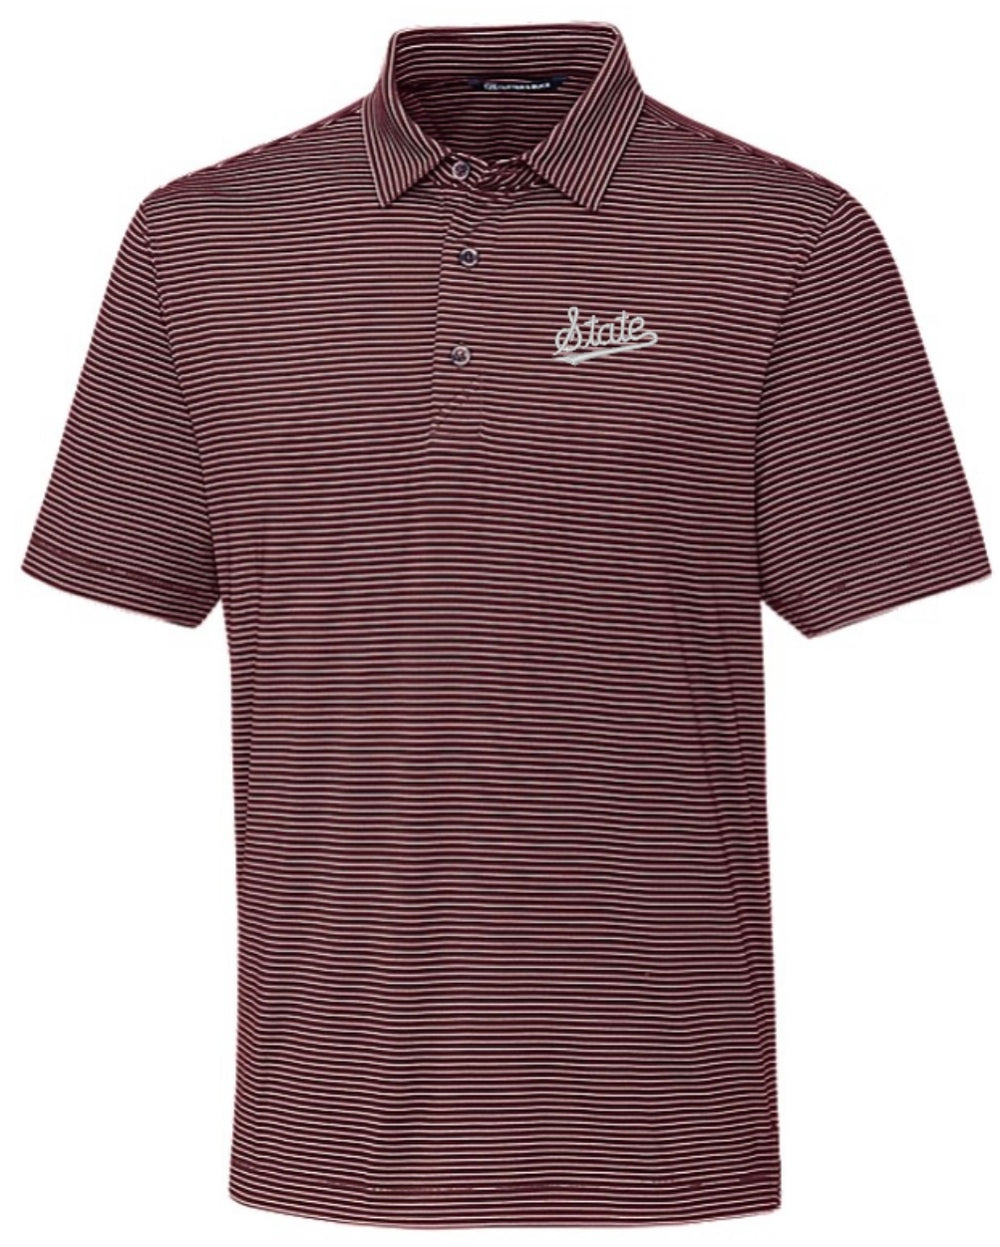 Mississippi State Cutter and Buck Pencil Stripe Polo- Maroon